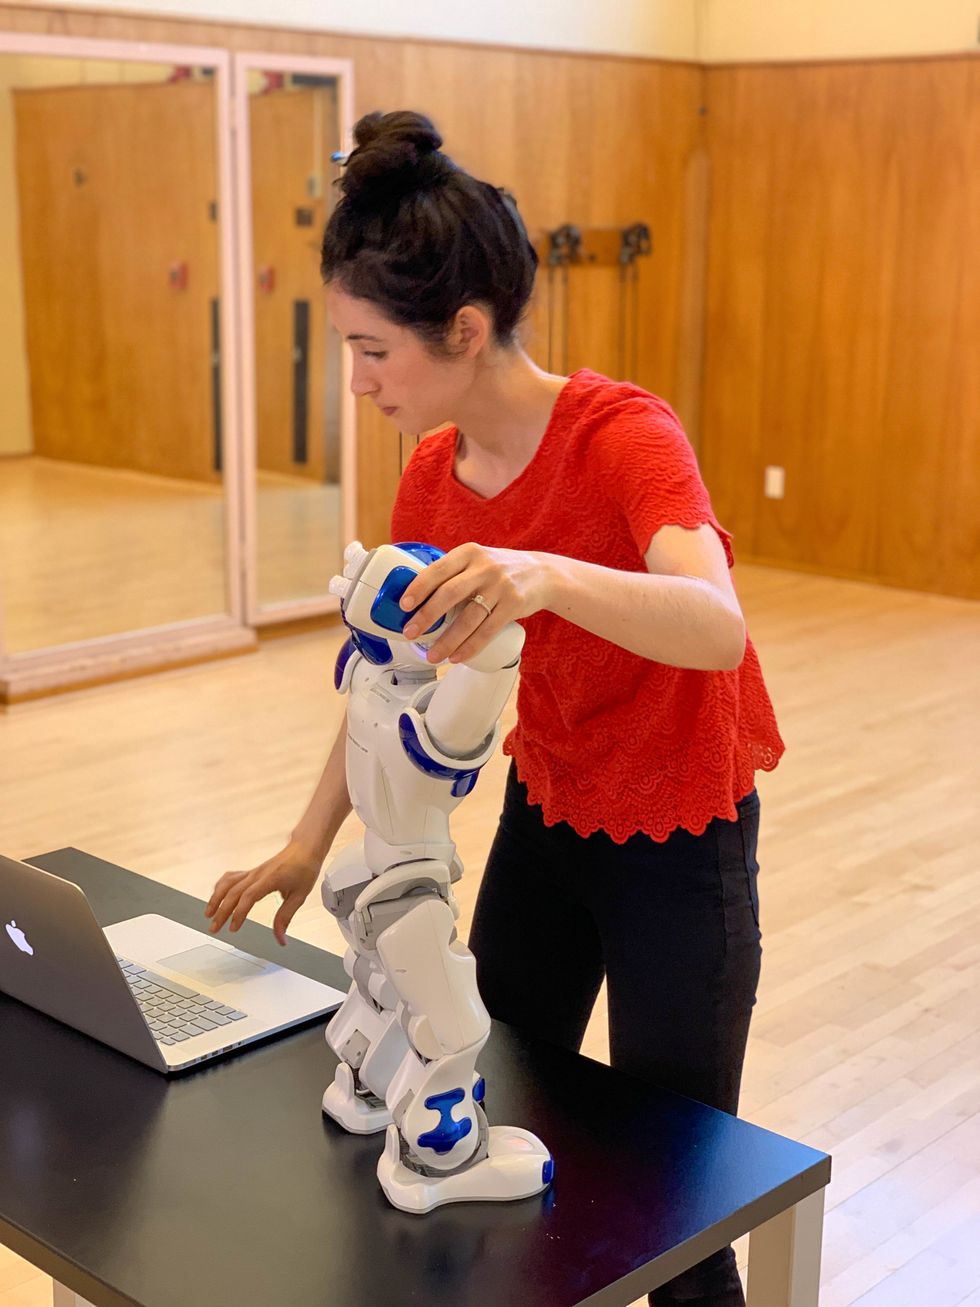 Catie Cuan holds a small robot standing on a table, while she types on a laptop.